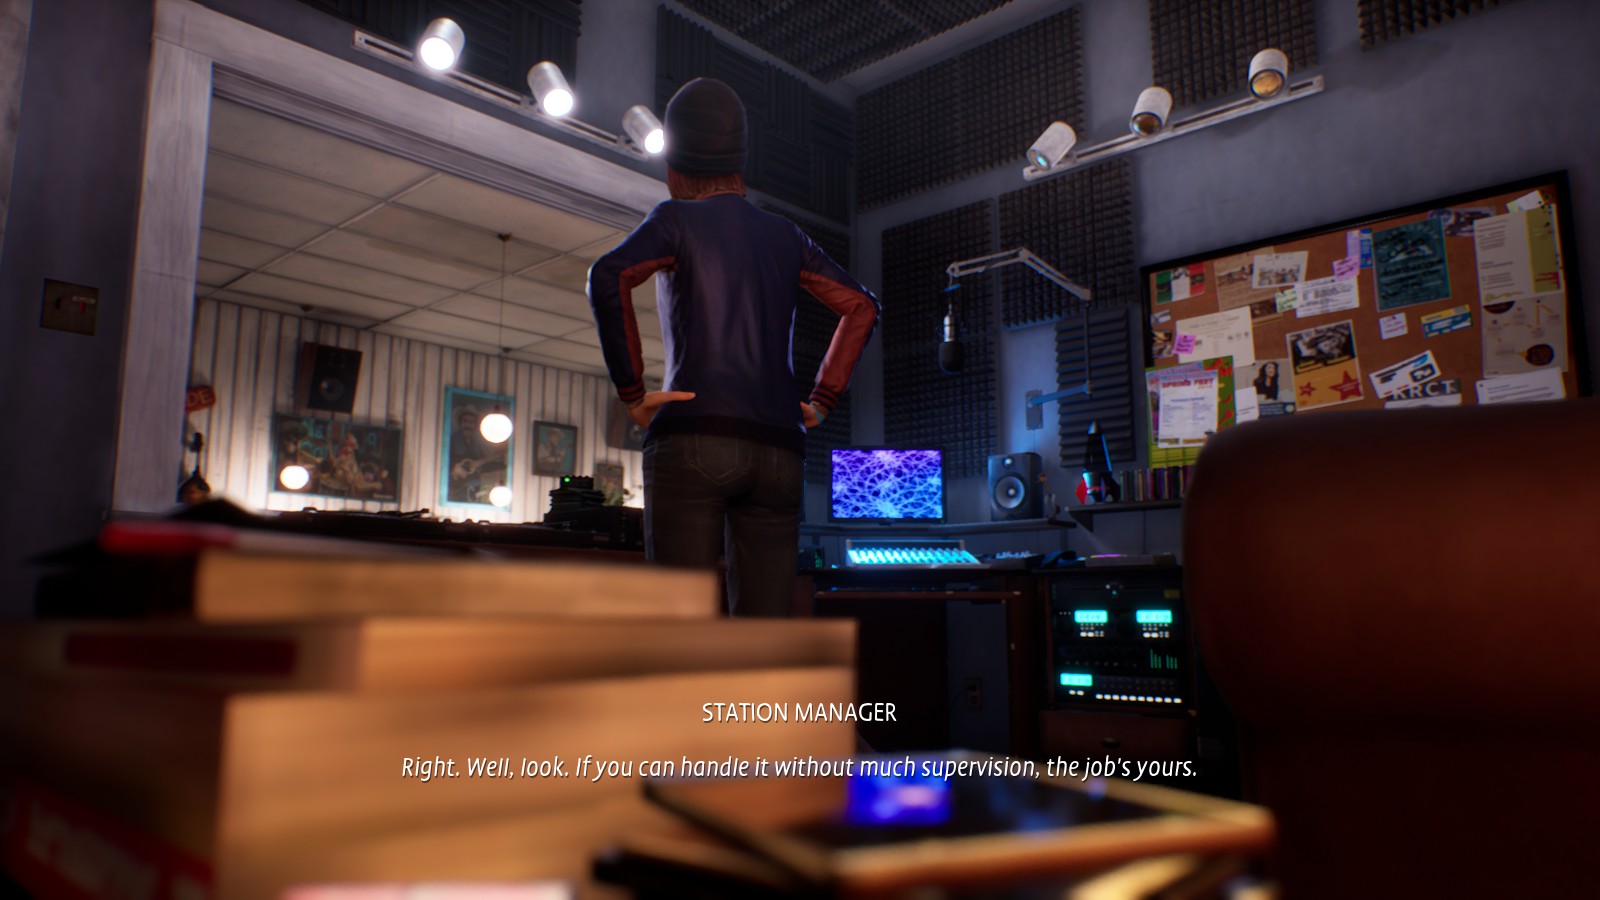 Life is Strange: True Colors release date, platforms, Wavelengths and more